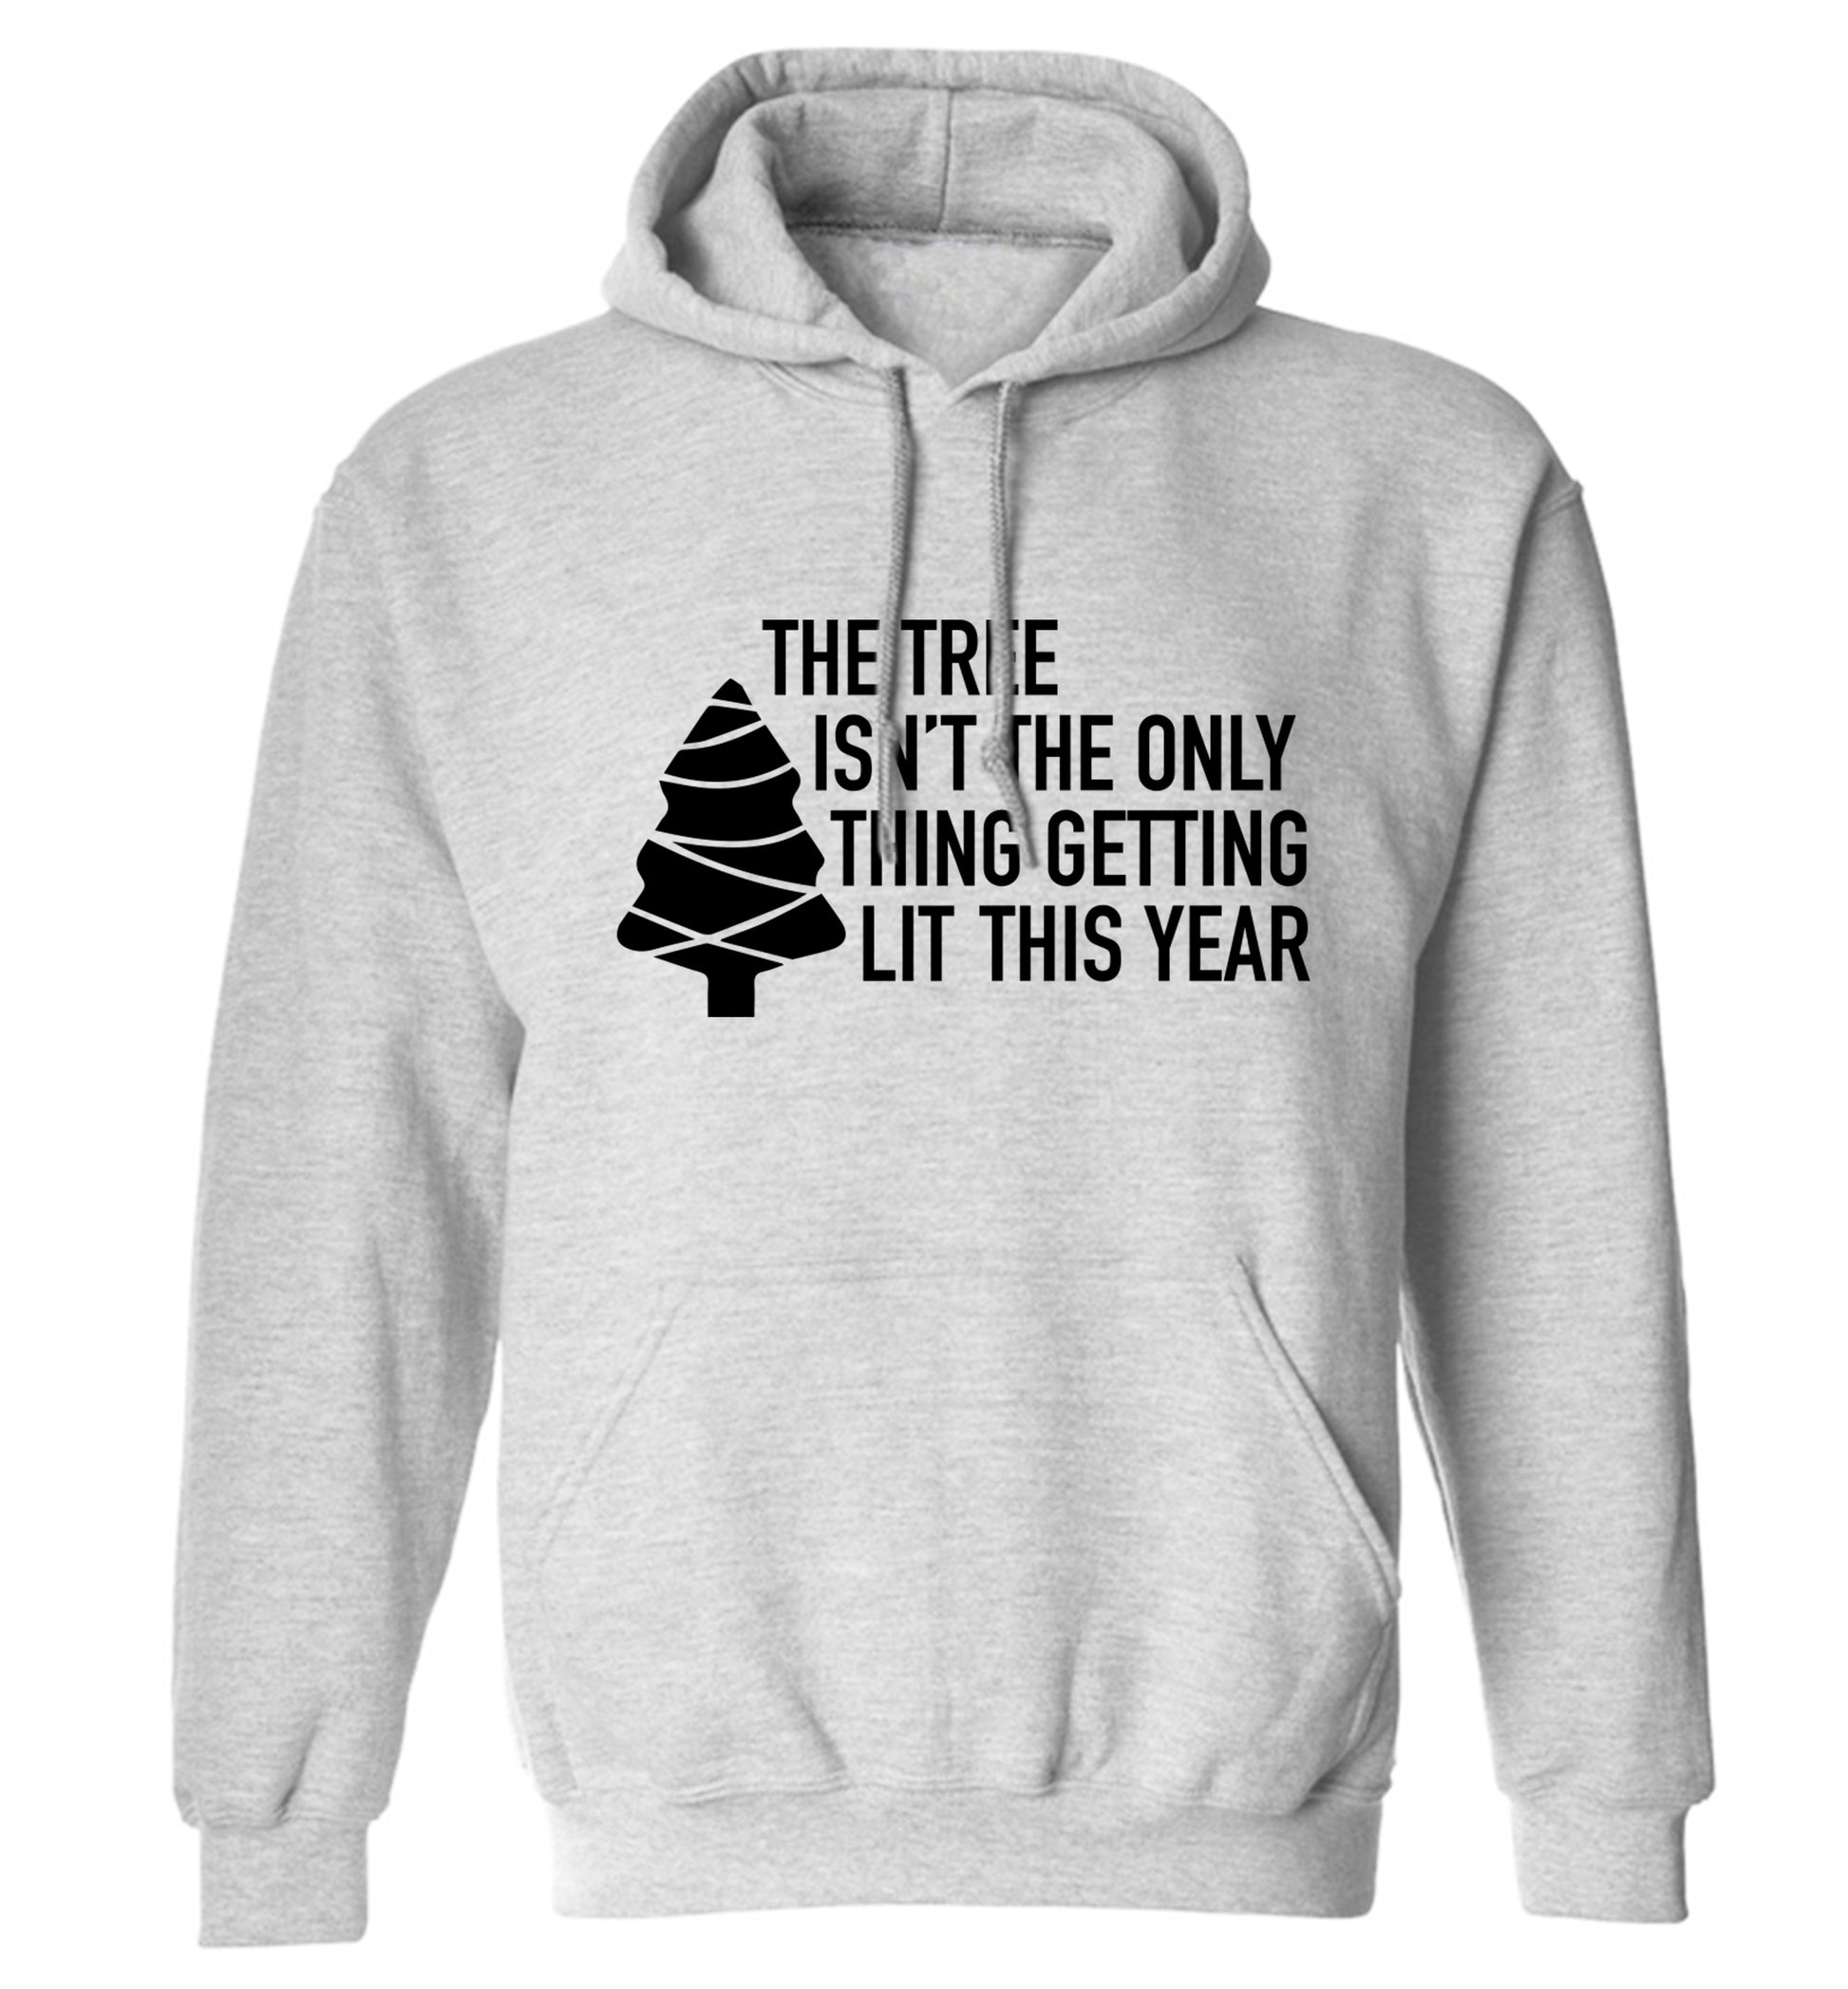 The tree isn't the only thing getting lit this year adults unisex grey hoodie 2XL